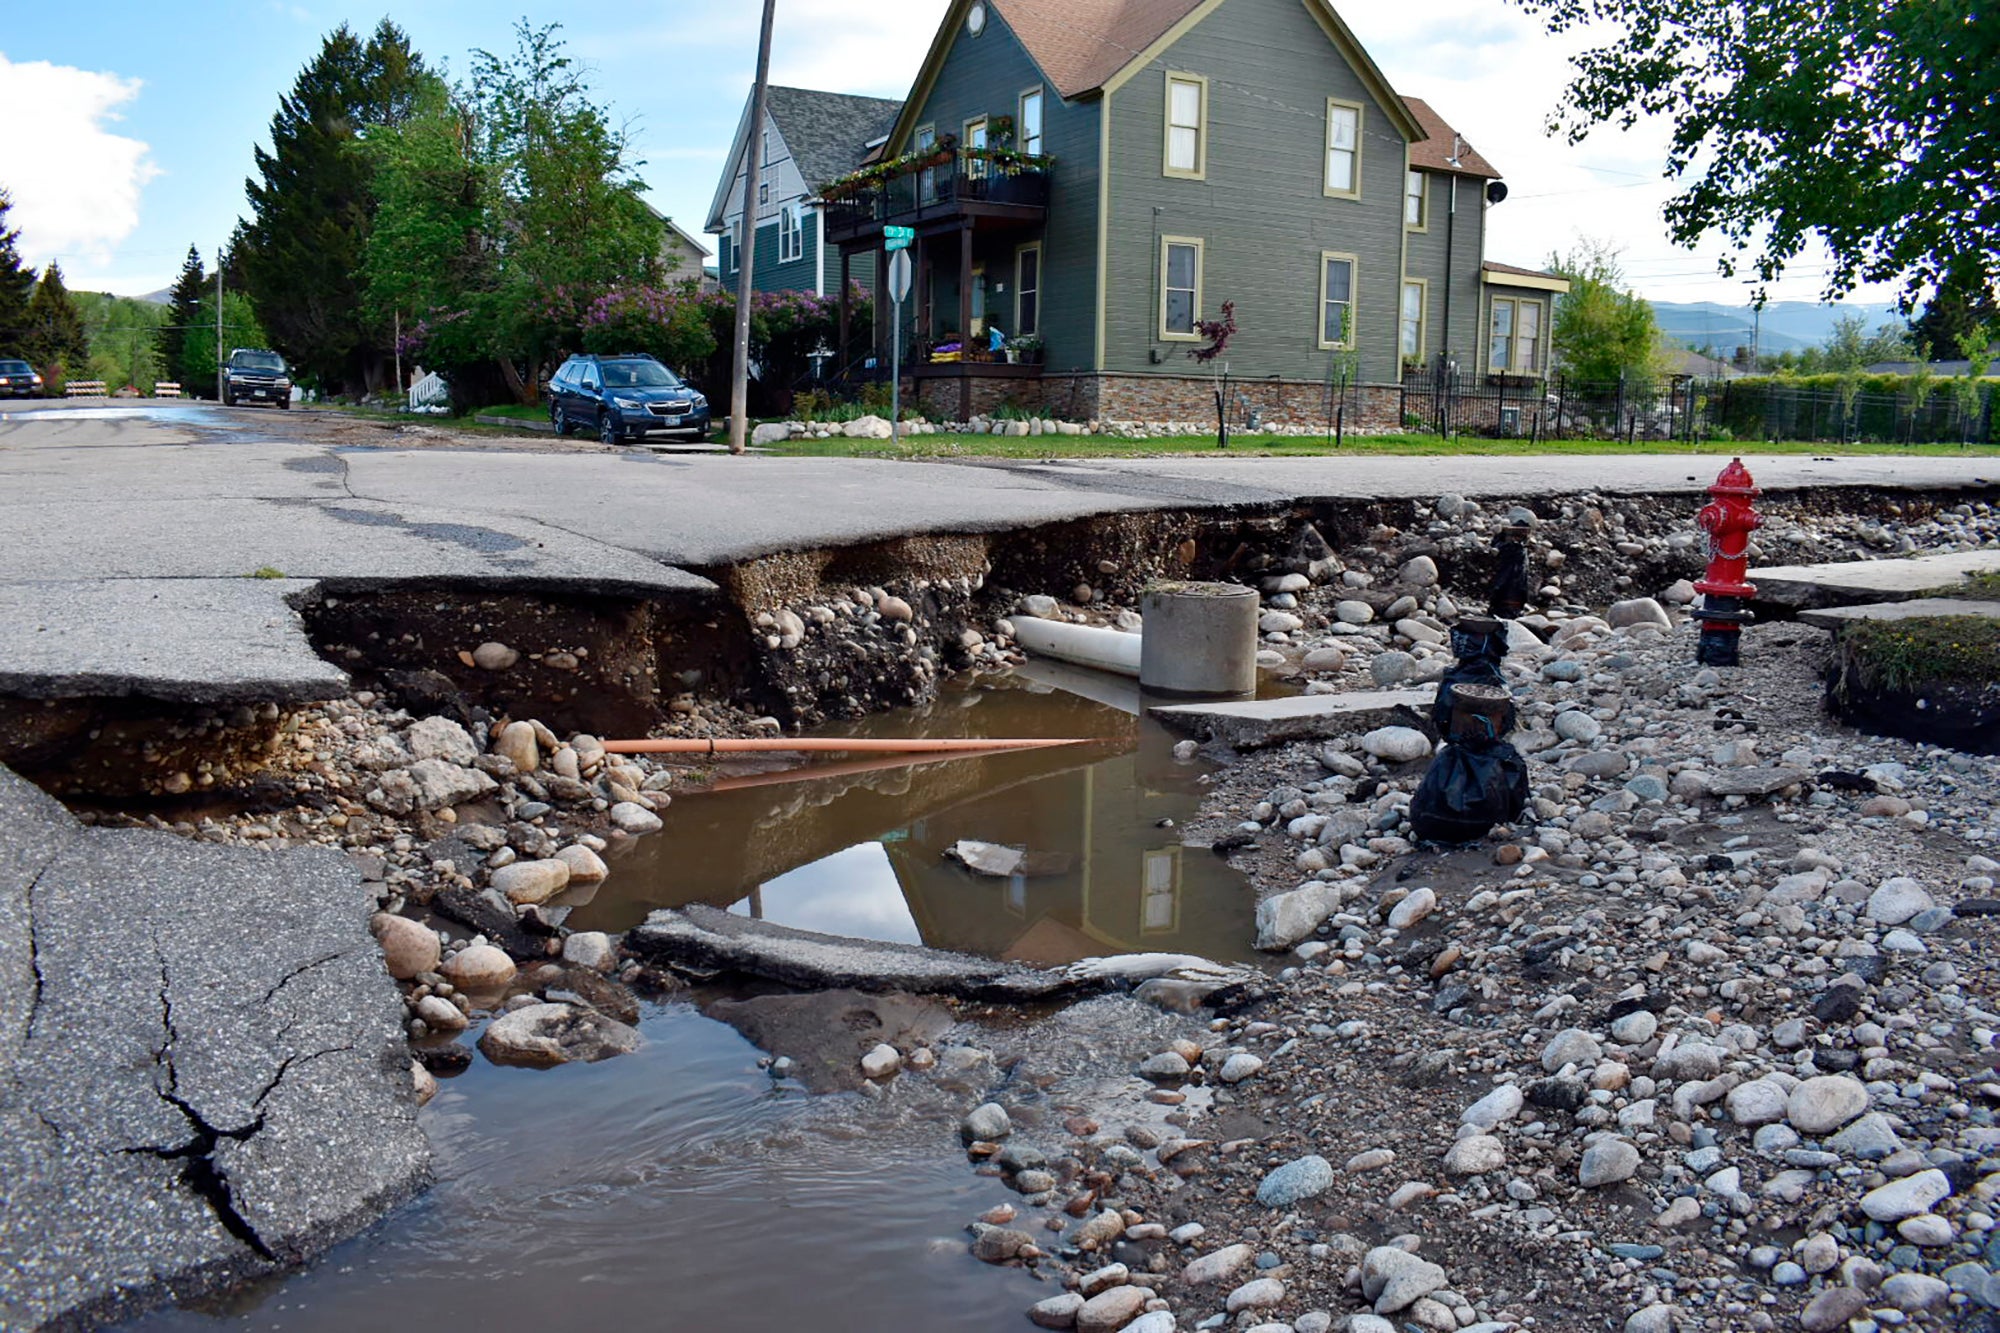 A street badly damaged by flooding is seen, Tuesday, June 14, 2022, in Red Lodge, Mont. (Photo: Matthew Brown, AP)